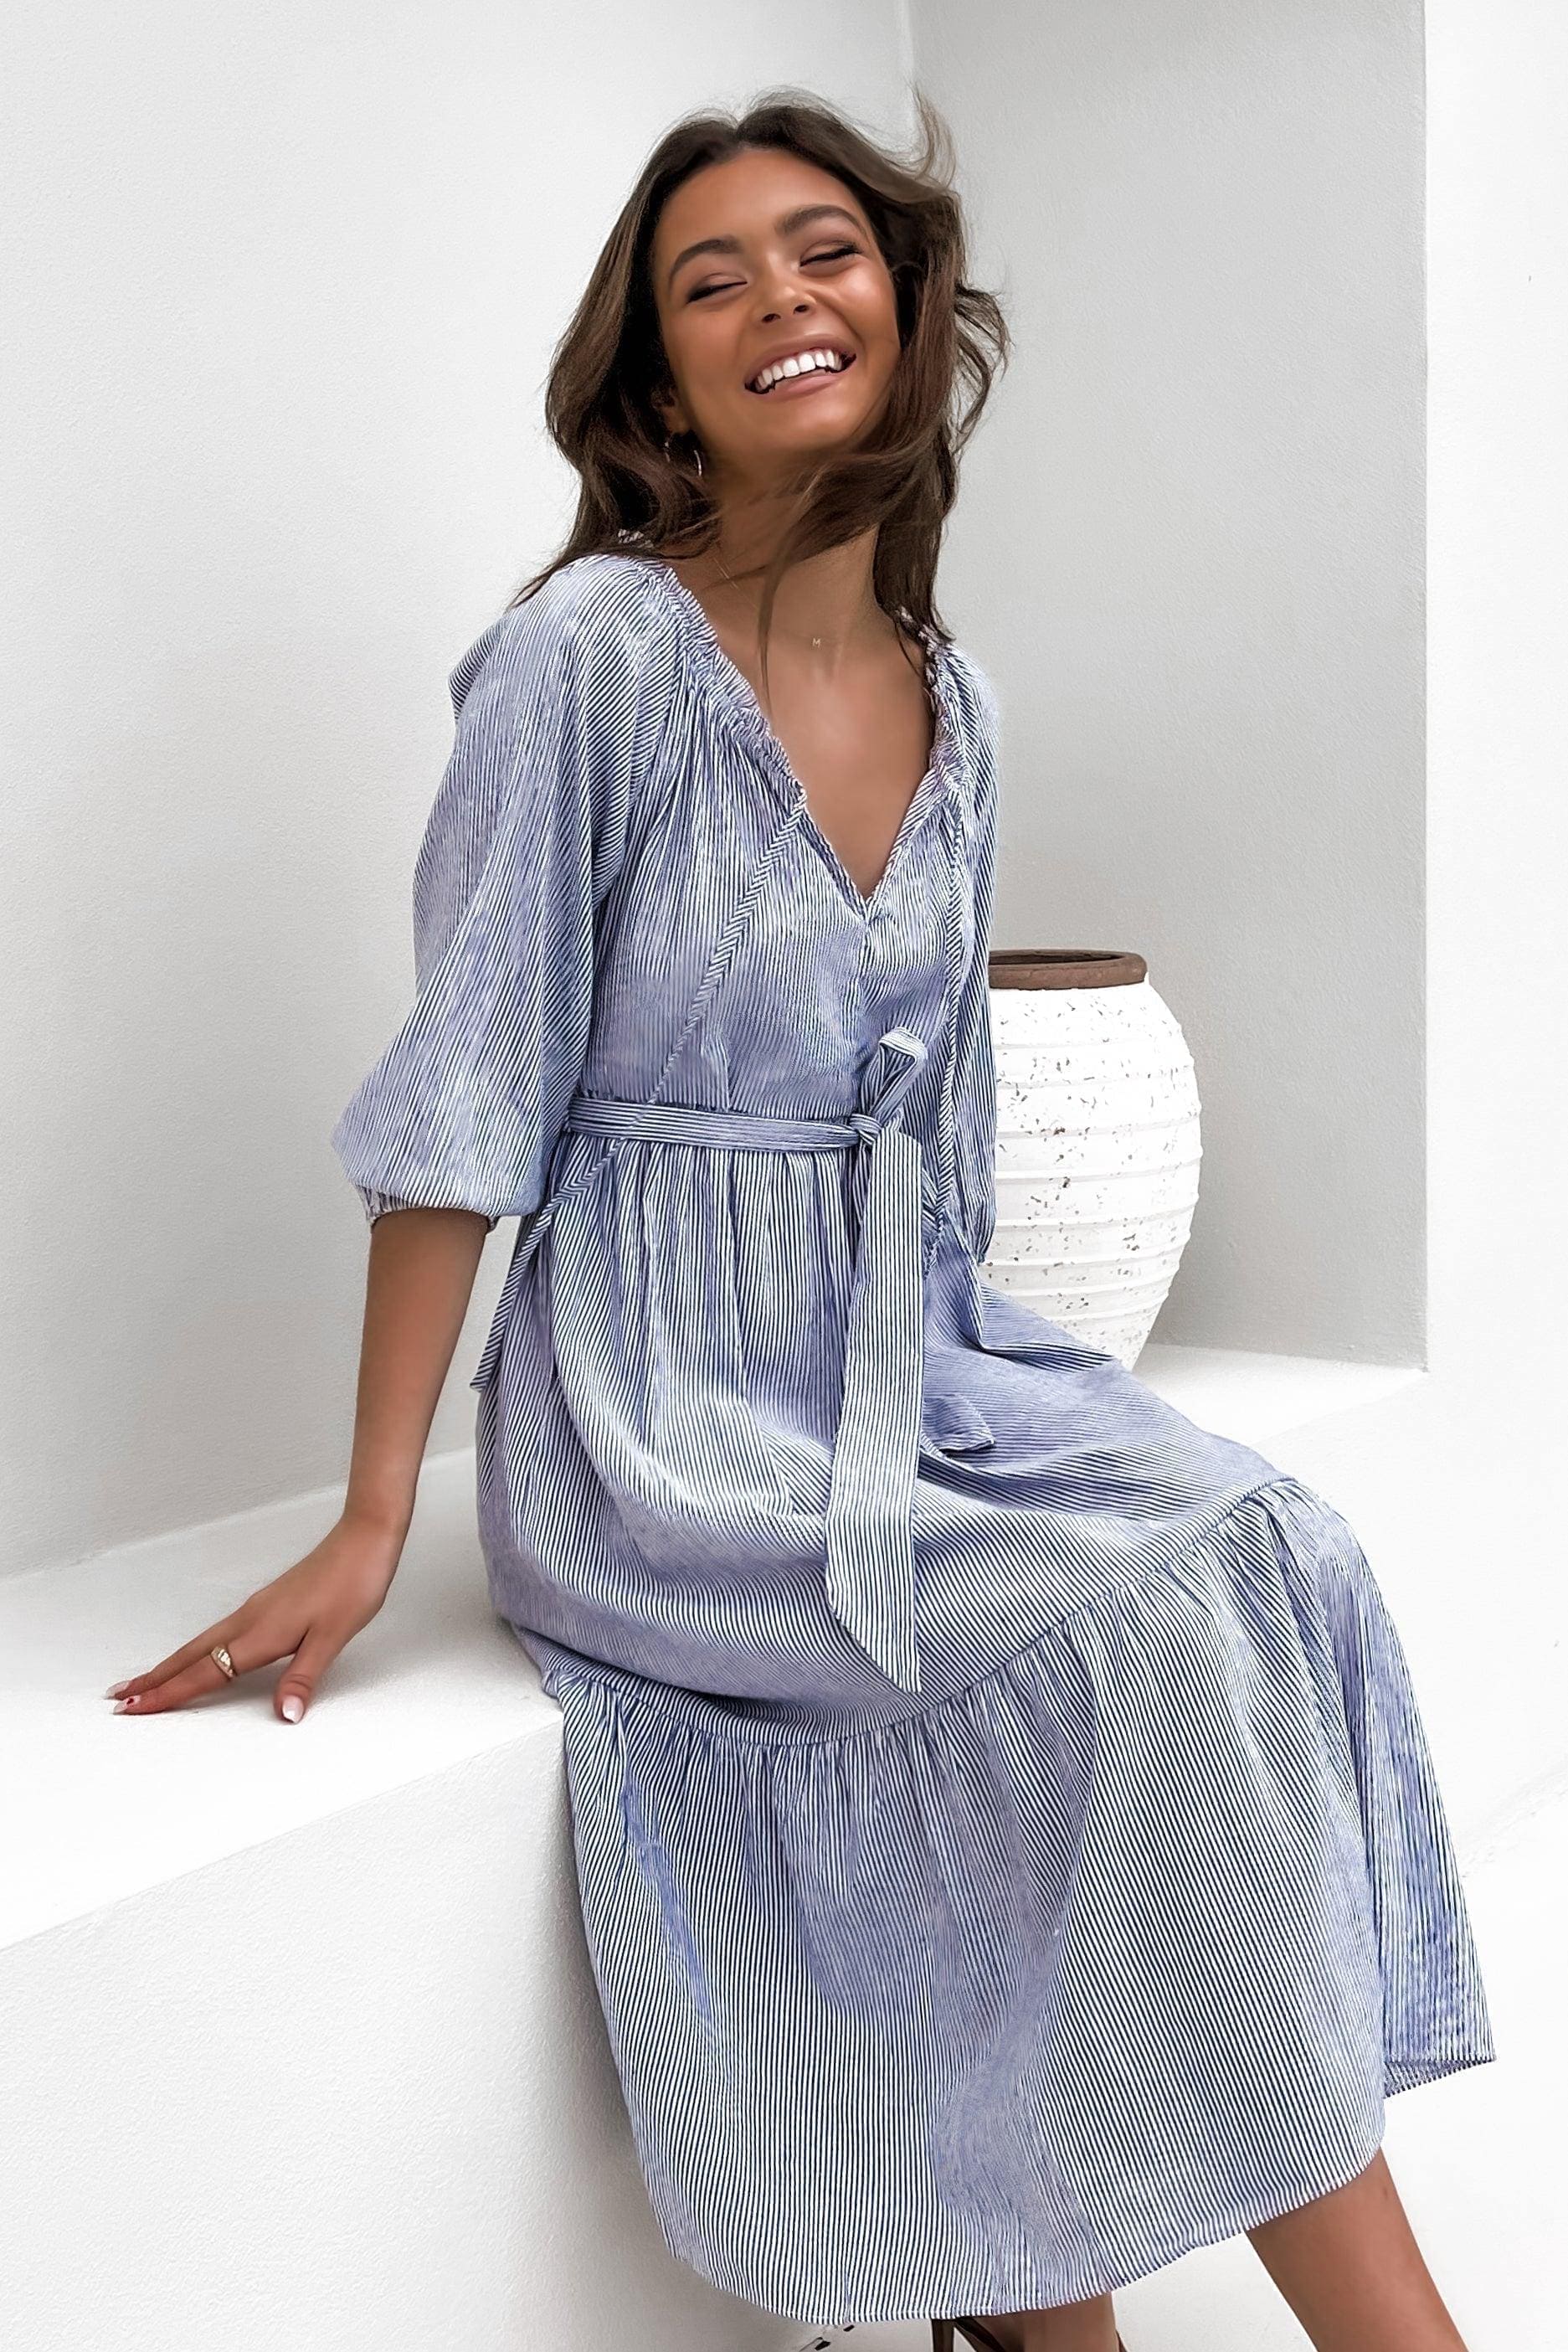 Tayia Dress, BAGGY, DRESS, DRESSES, LONG SLEEVE, MIDI DRESS, NEW ARRIVALS, PIN STRIPE, Sale, WAIST TIE, Tayia Dress only $61.00 @ MISHKAH ONLINE FASHION BOUTIQUE, Shop The Latest Women's Dresses - Our New Tayia Dress is only $61.00, @ MISHKAH ONLINE FASHION BOUTIQUE-MISHKAH